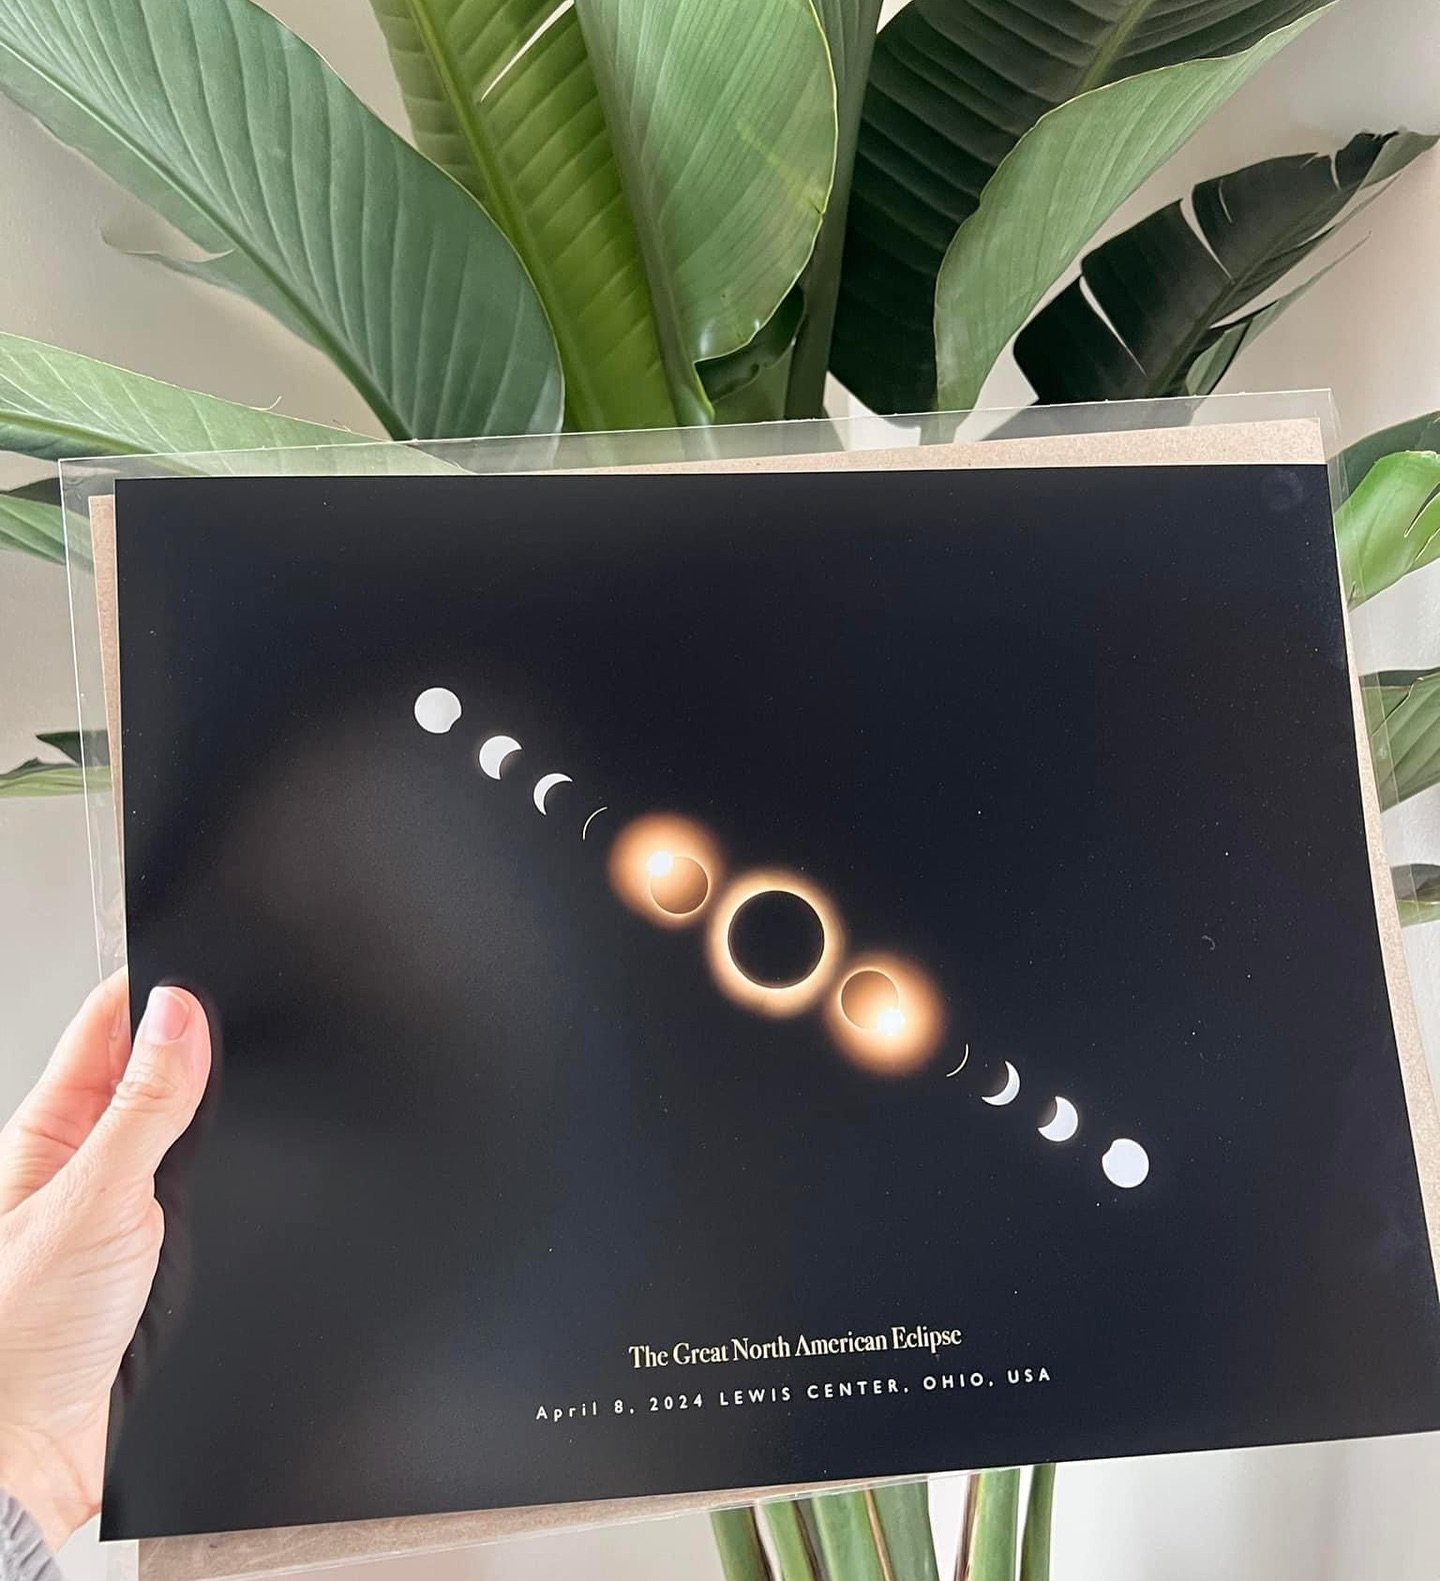 Thanks so much everyone for all the kind words about my eclipse photo! I did not expect this many people to love it as much as I did and also be interested in prints! 

I opened up a print shop on my client gallery website for anyone that would like 